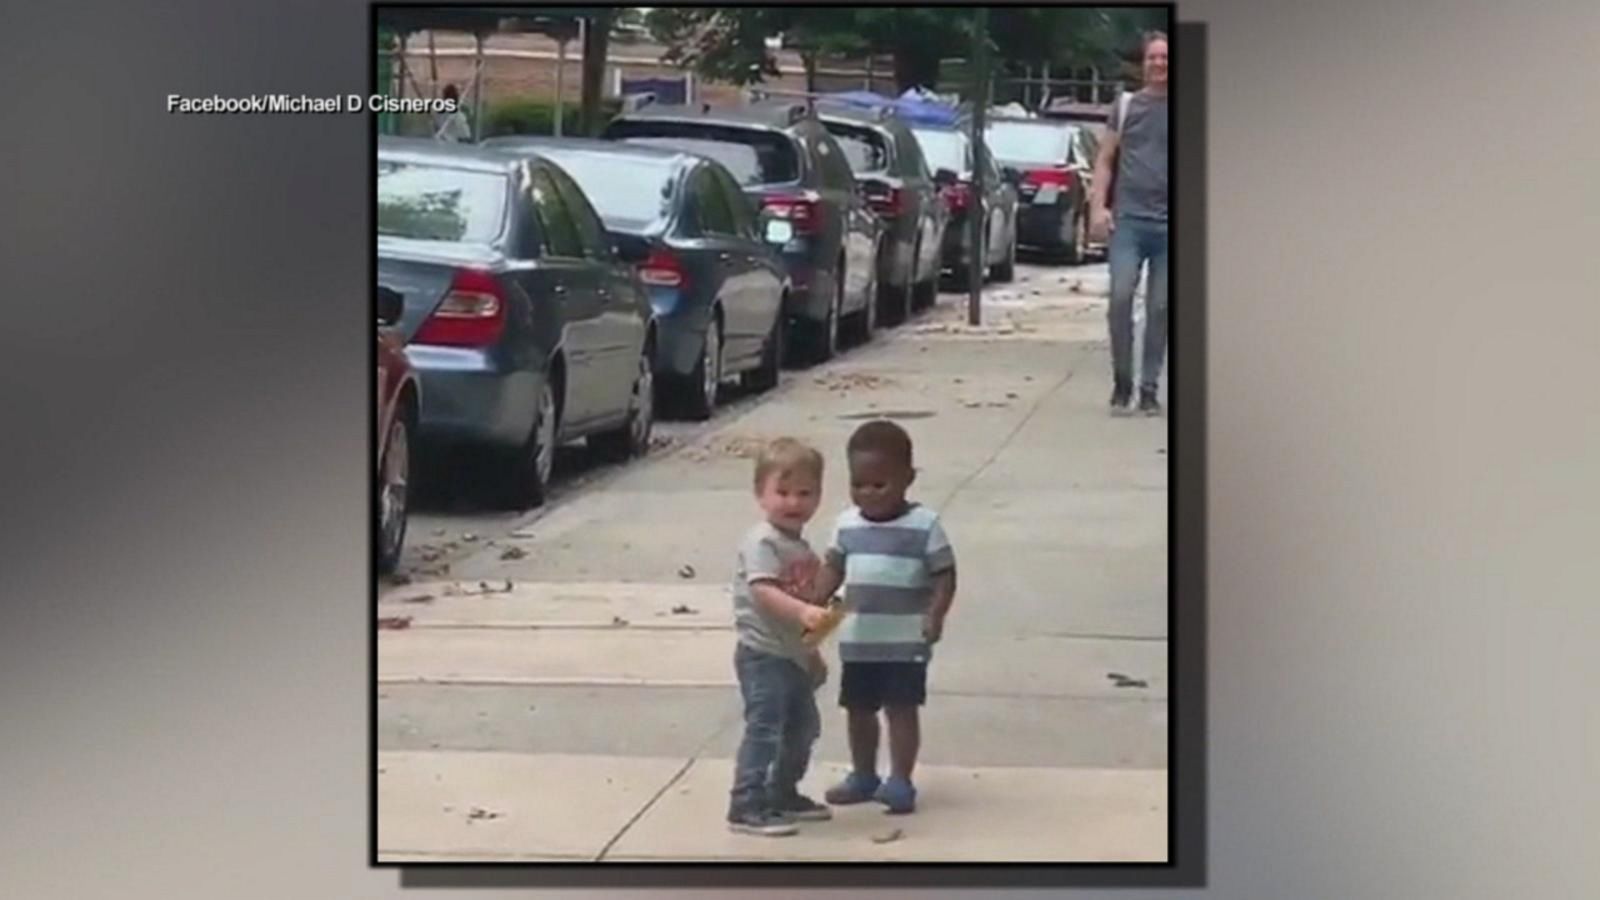 Toddlers run in for a big hug in heartwarming video - Good Morning America